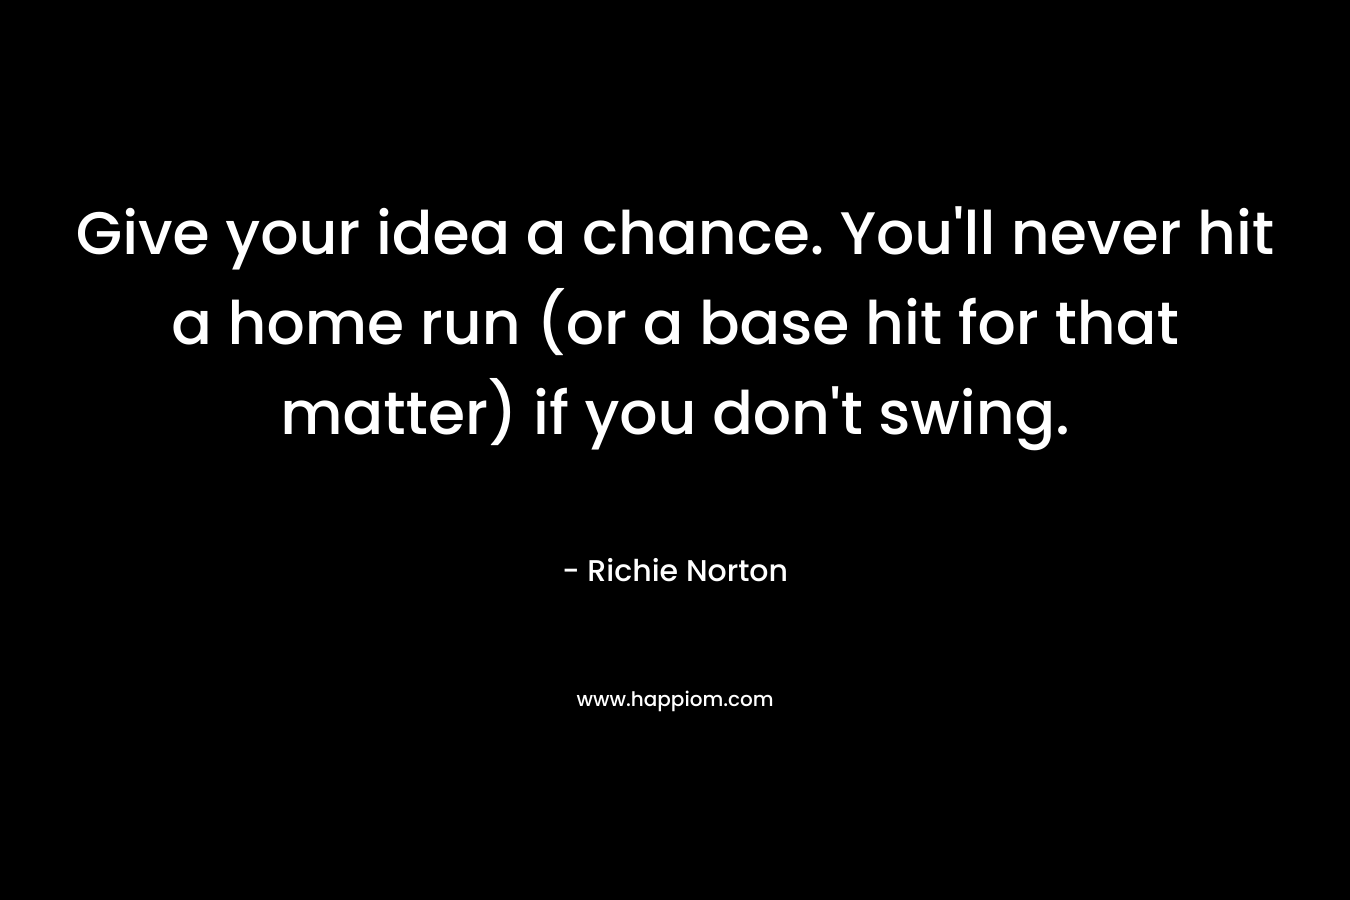 Give your idea a chance. You'll never hit a home run (or a base hit for that matter) if you don't swing.